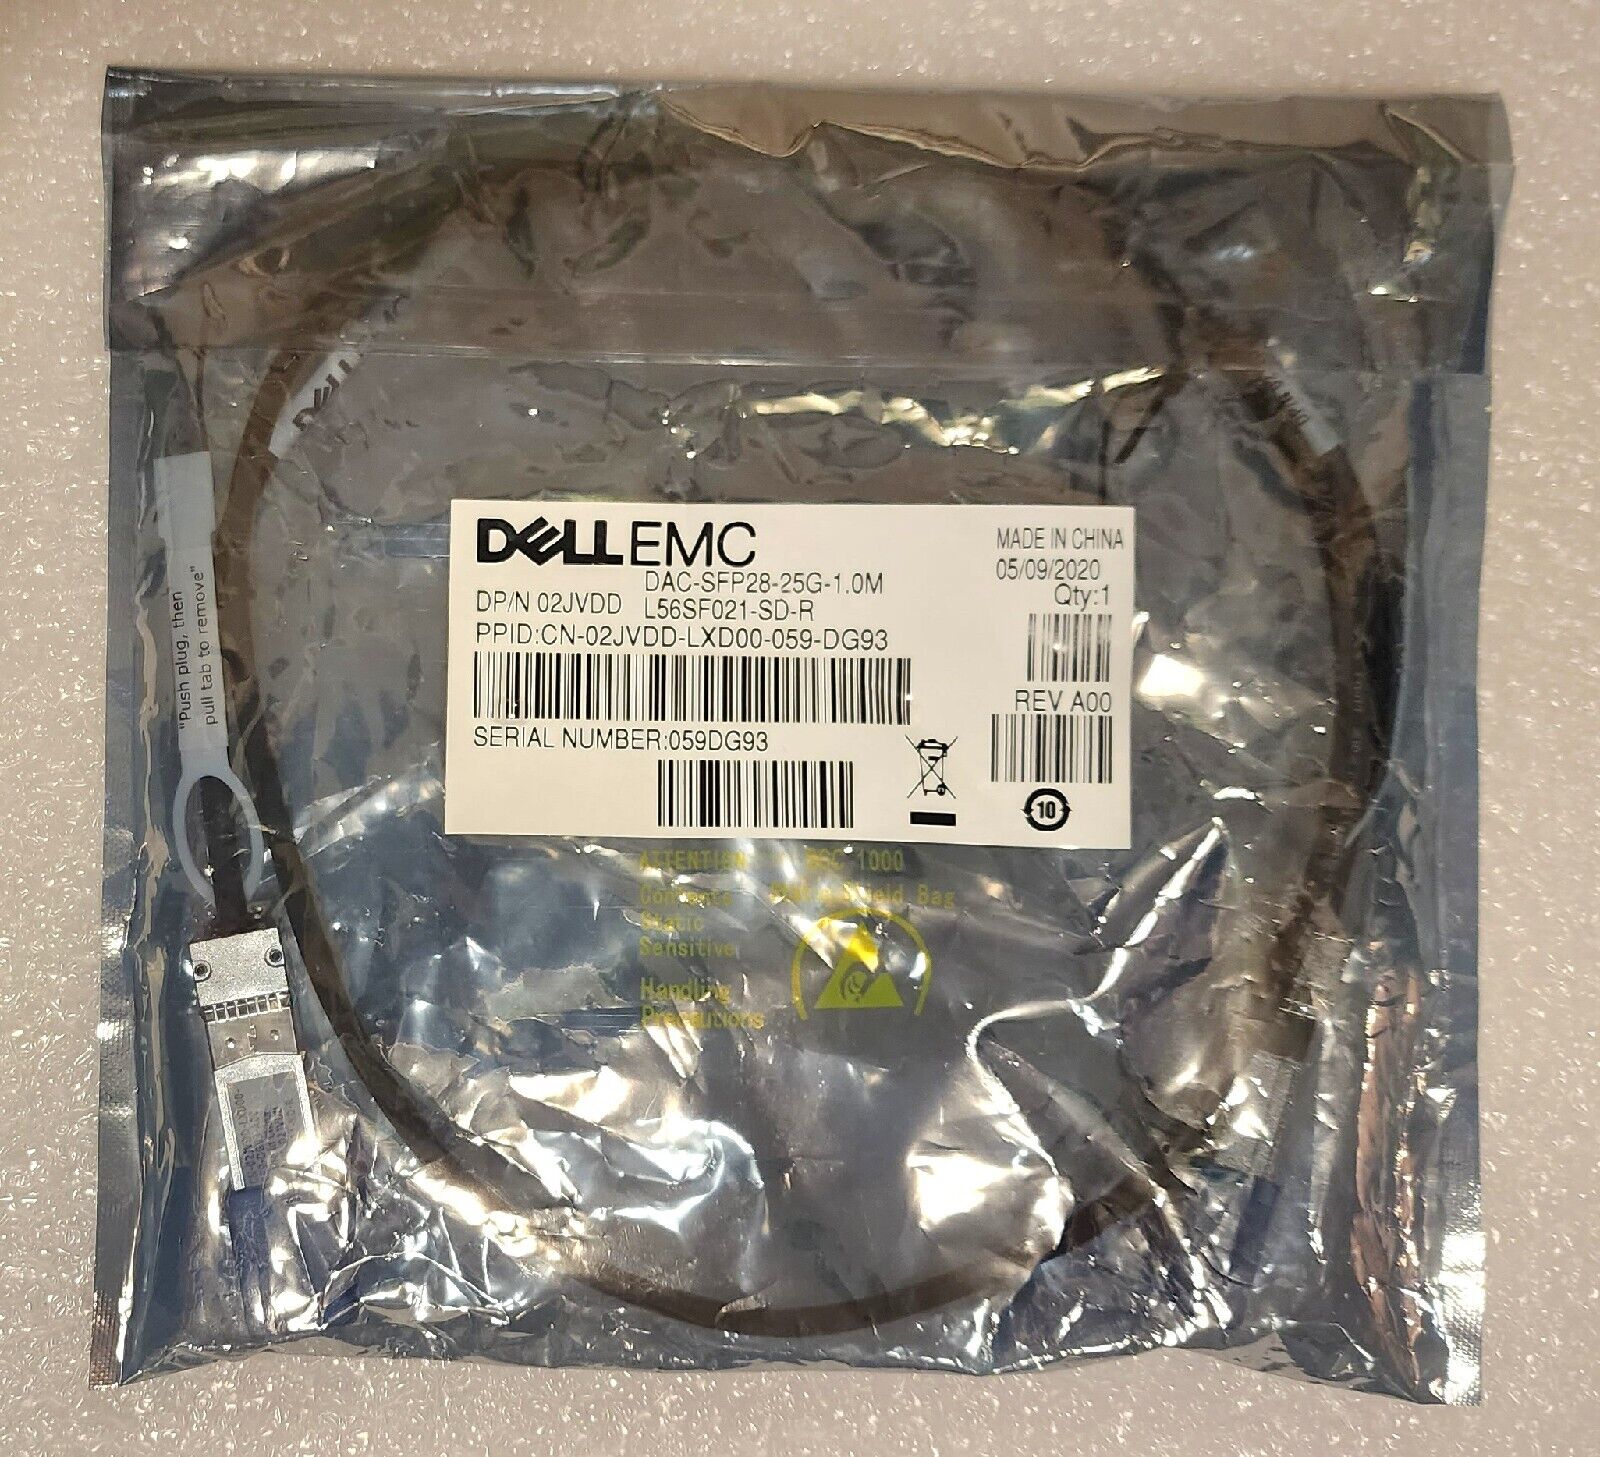 New Dell Networking Cable, SFP28 to SFP28, 25GbE, DAC-SFP28-25G-1.0M DP/N 02JVDD